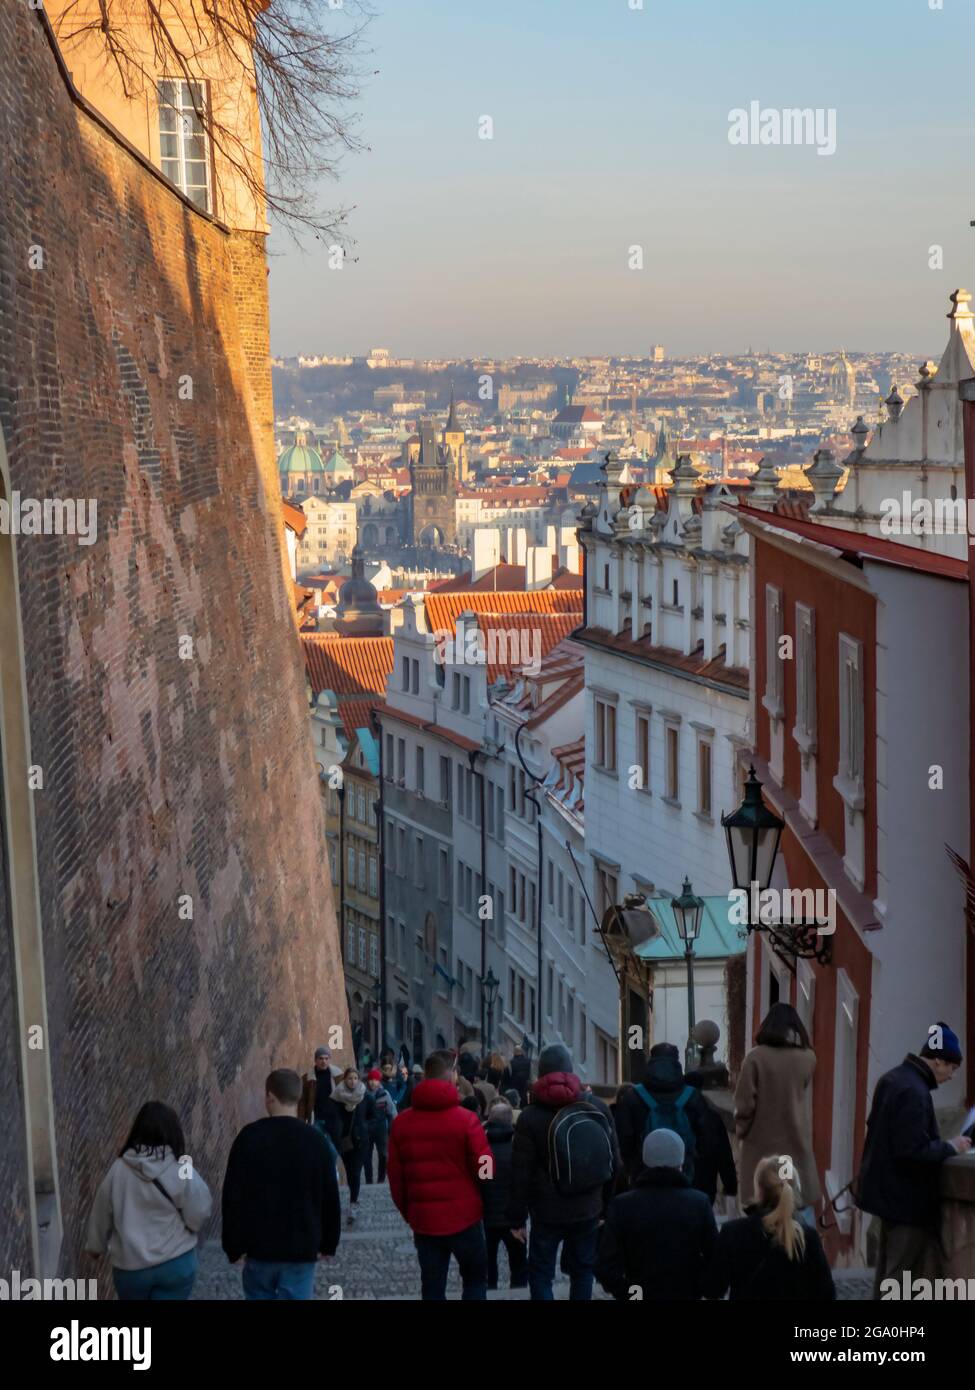 Prague, Czech Republic; February 16 2019. Streets of Prague with people walking and a panoramic view of the city. Stock Photo